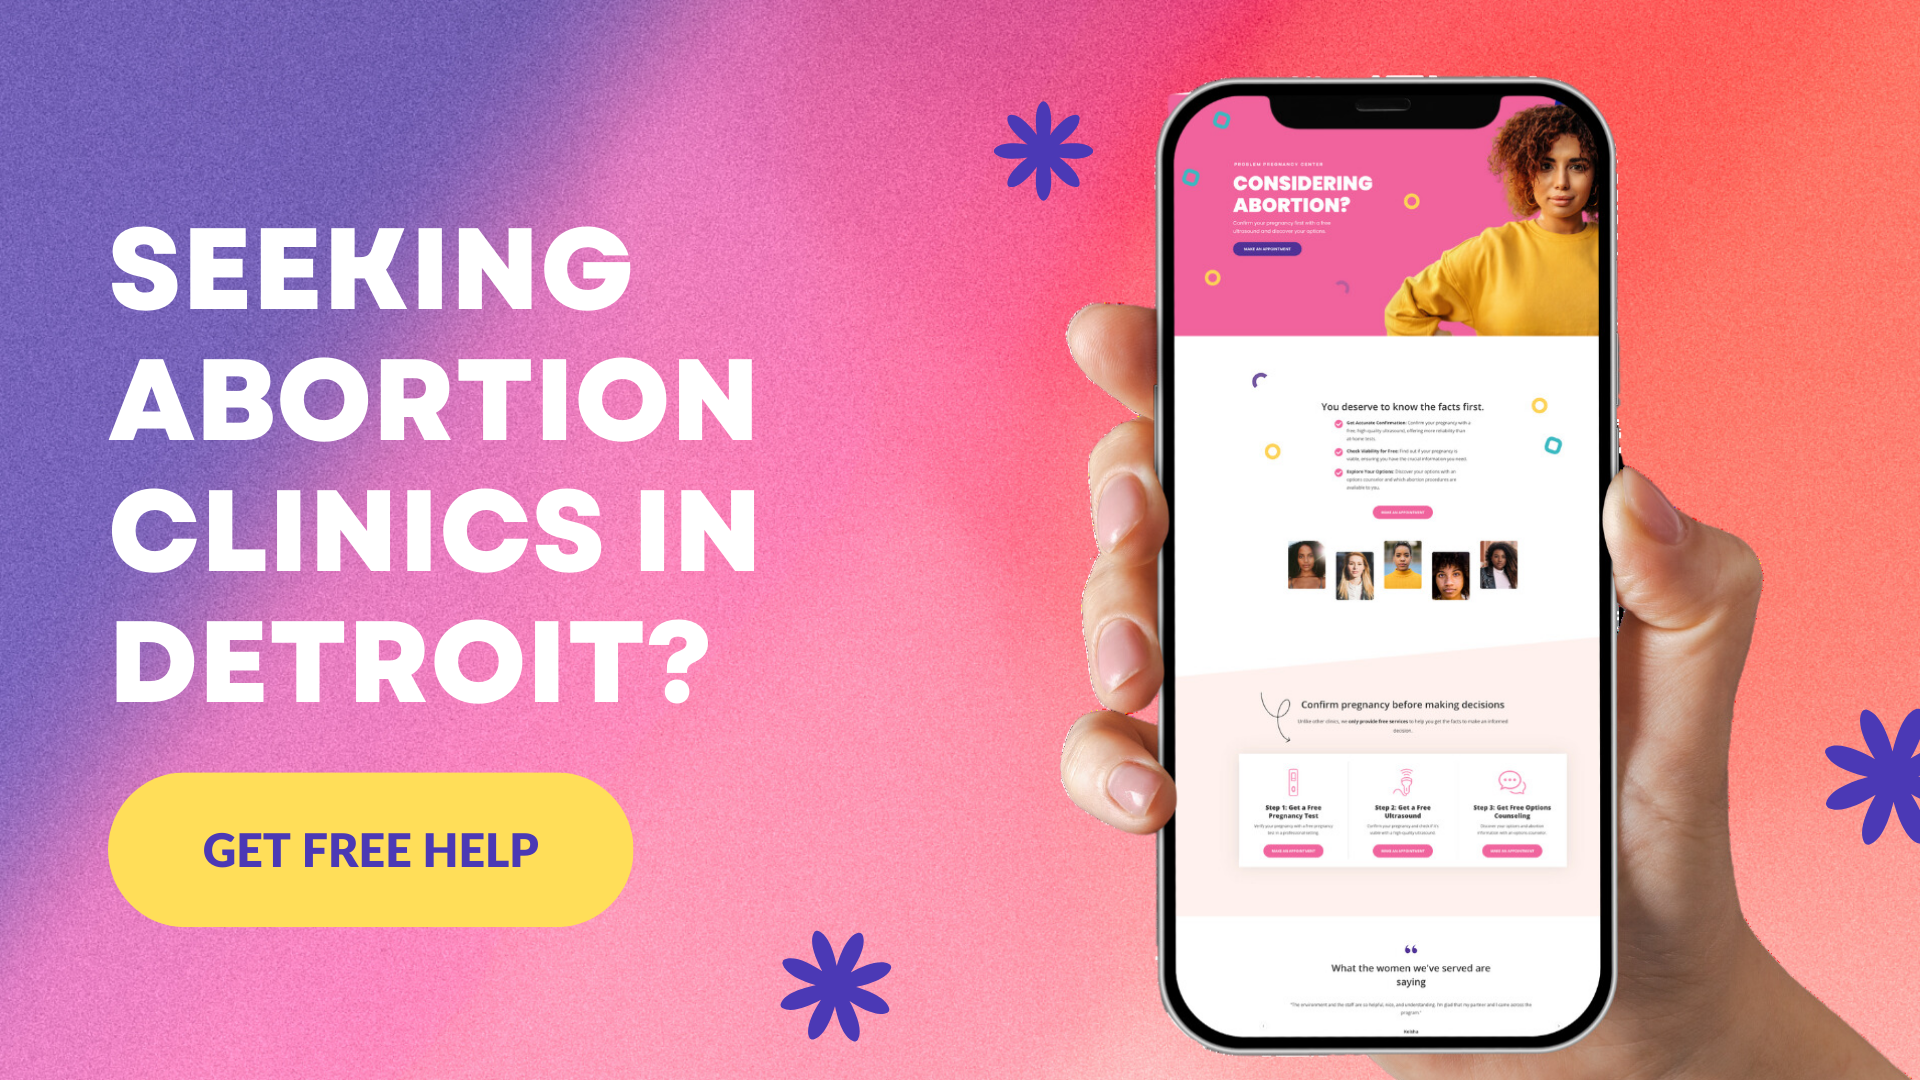 Discover the Best Free Alternatives to Abortion Clinics in Detroit for Comprehensive Care and Support at the Problem Pregnancy Center. 